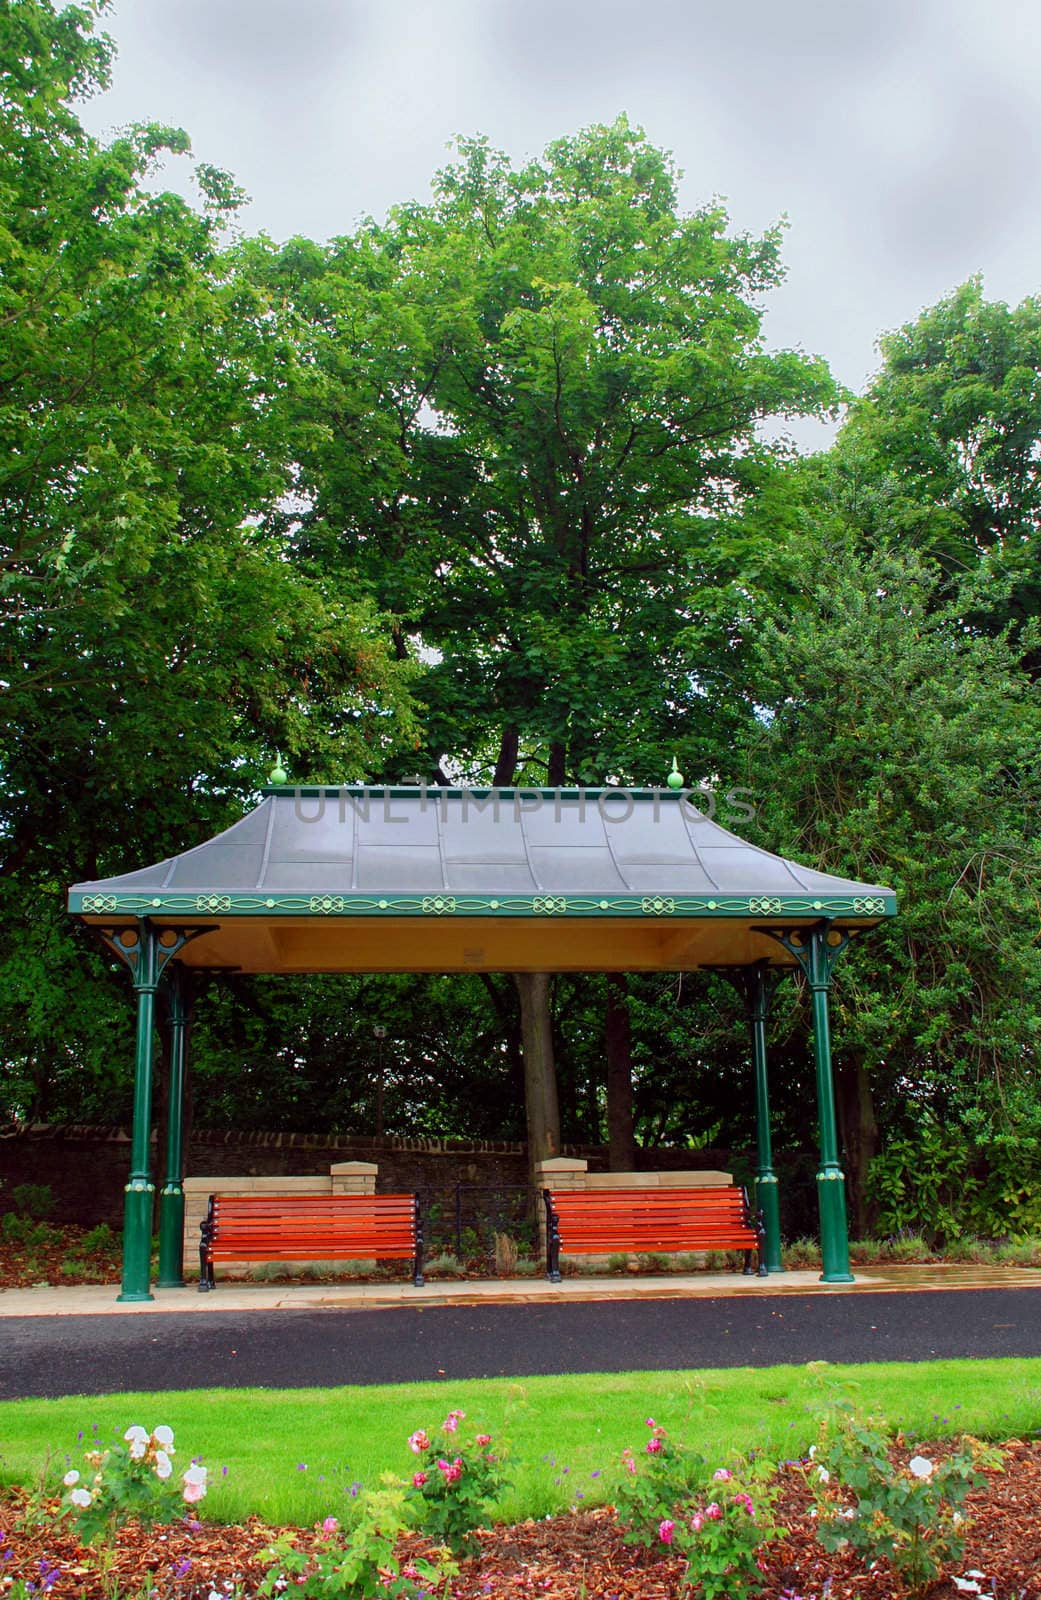 The Park Shelter by pwillitts